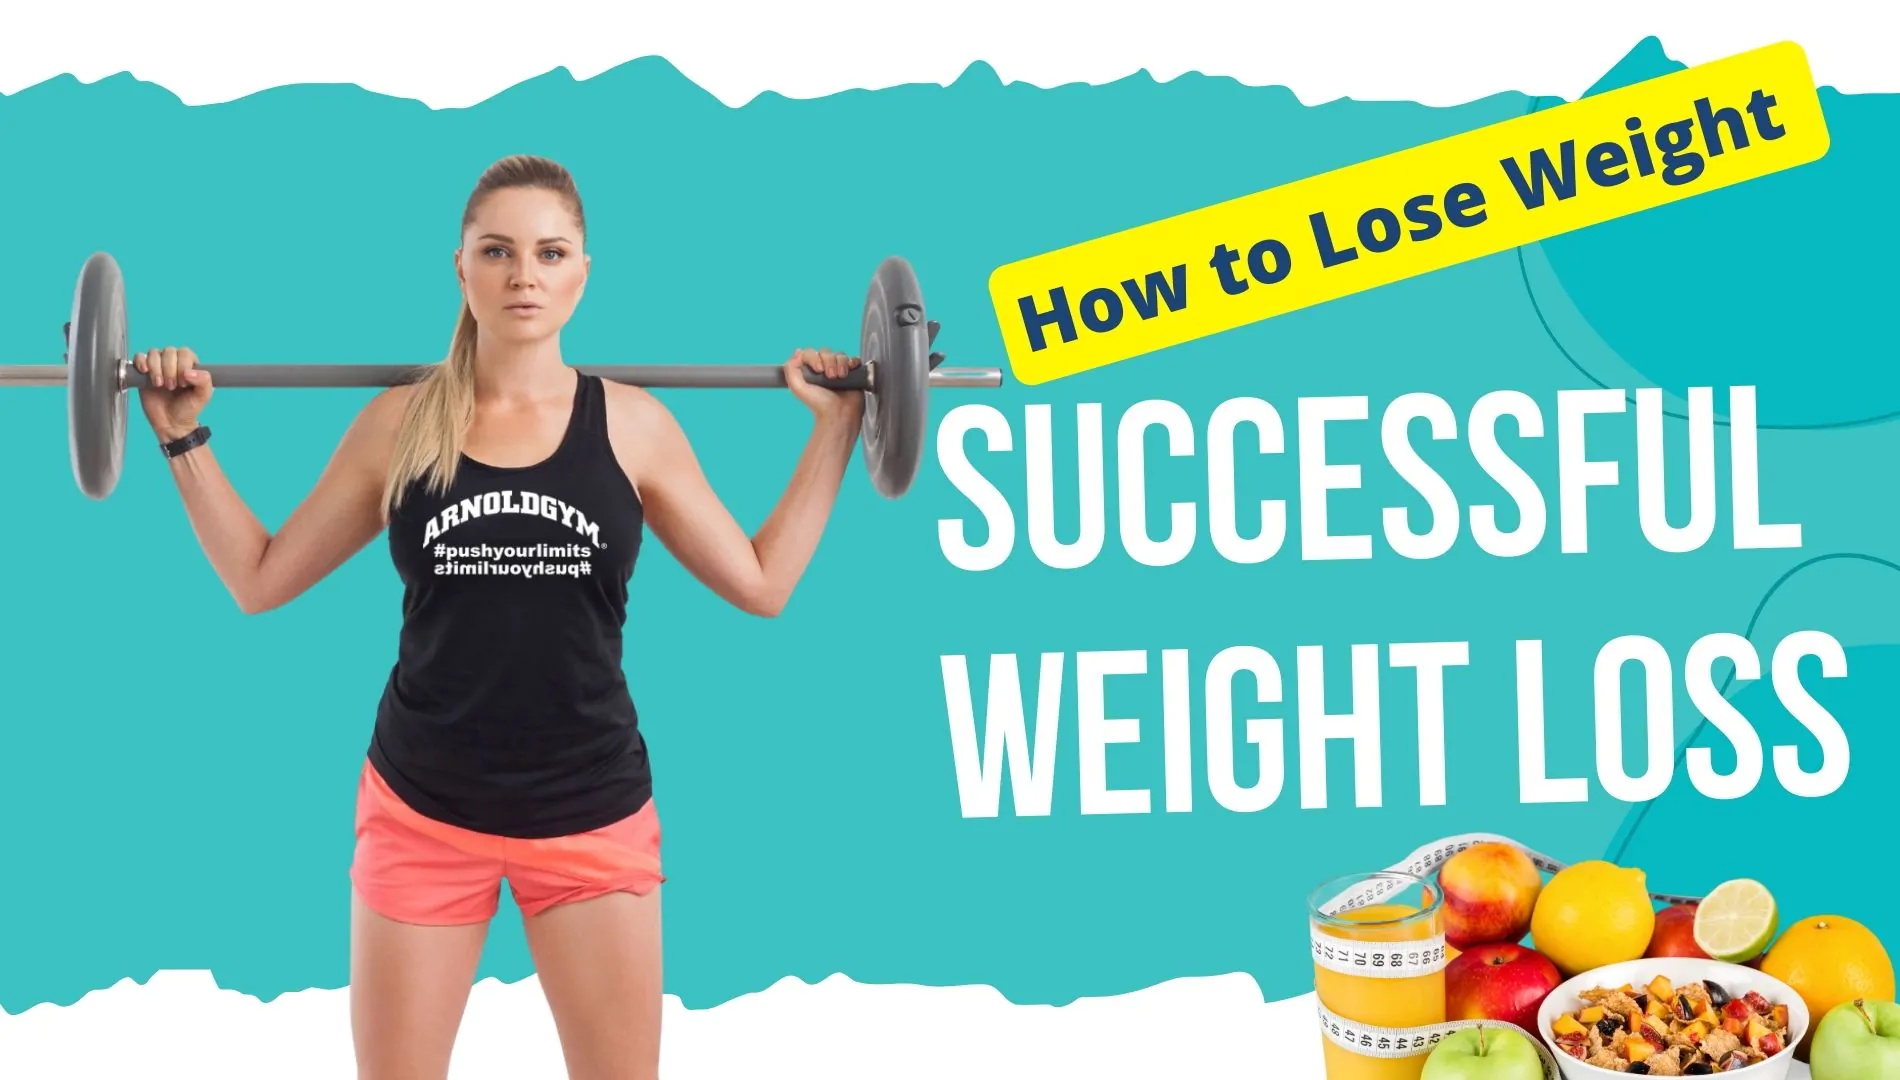 How to Lose Weight without Starving with Diet-arnold gym blog